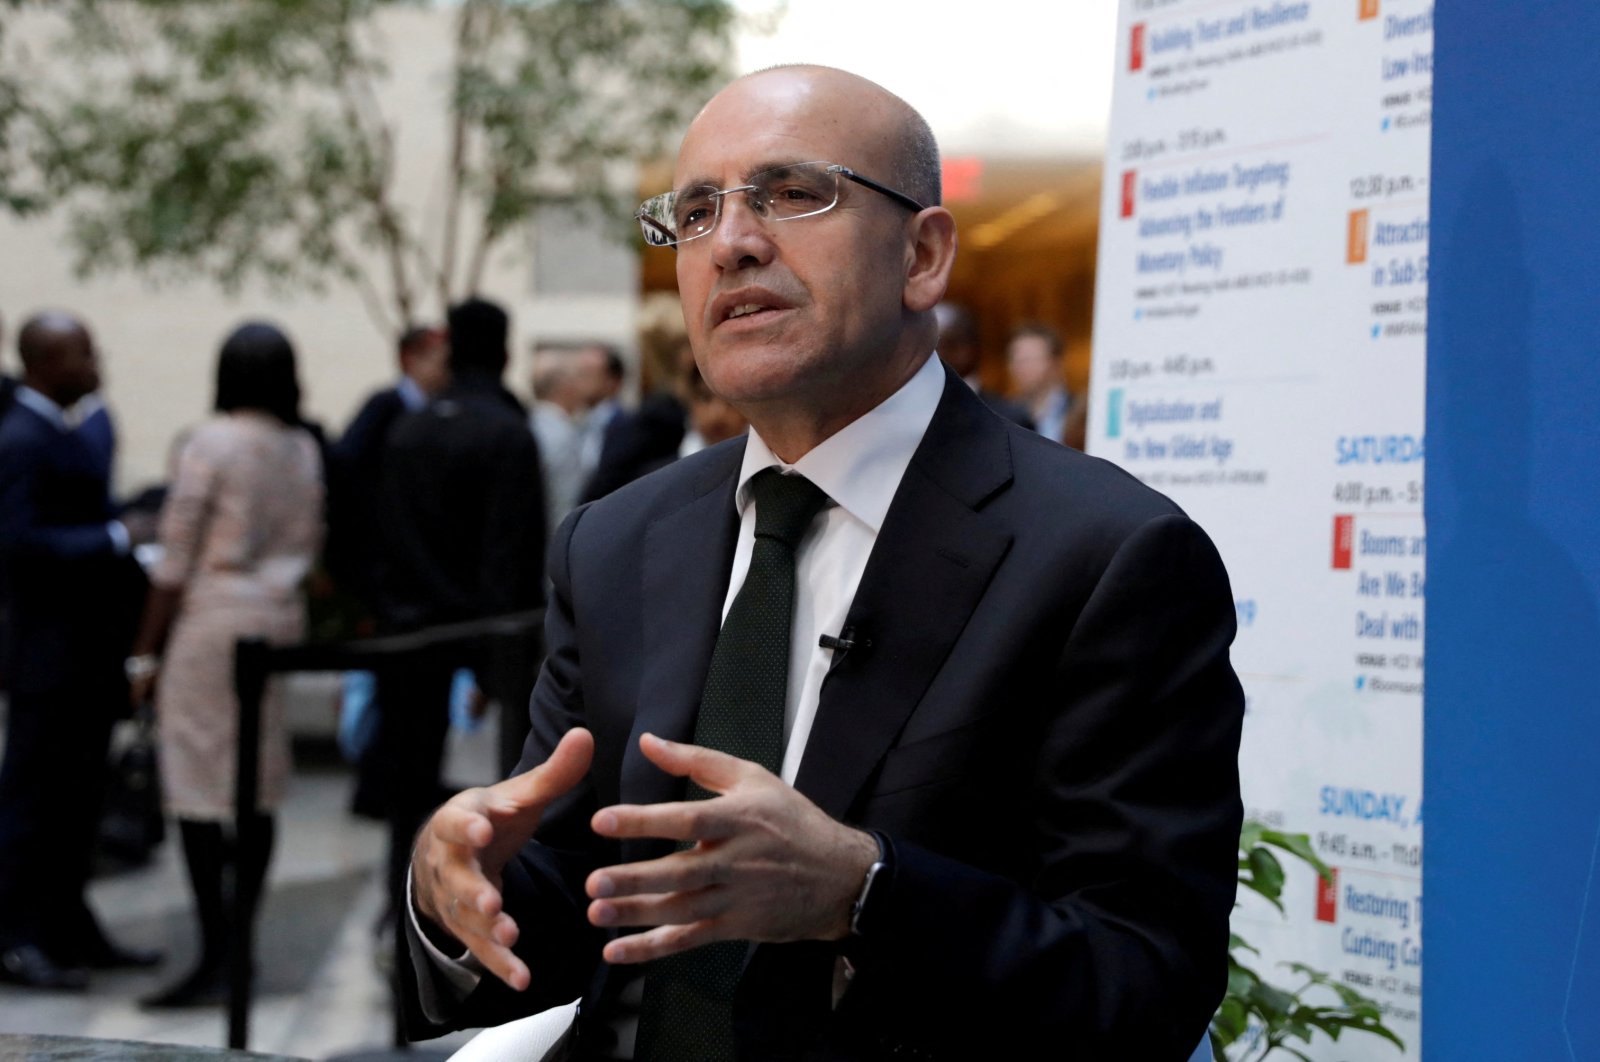 Former Finance Minister Mehmet Şimşek speaks during a television interview after IMFC plenary at the International Monetary Fund (IMF)/World Bank spring meeting in Washington, U.S., April 20, 2018. (Reuters Photo)